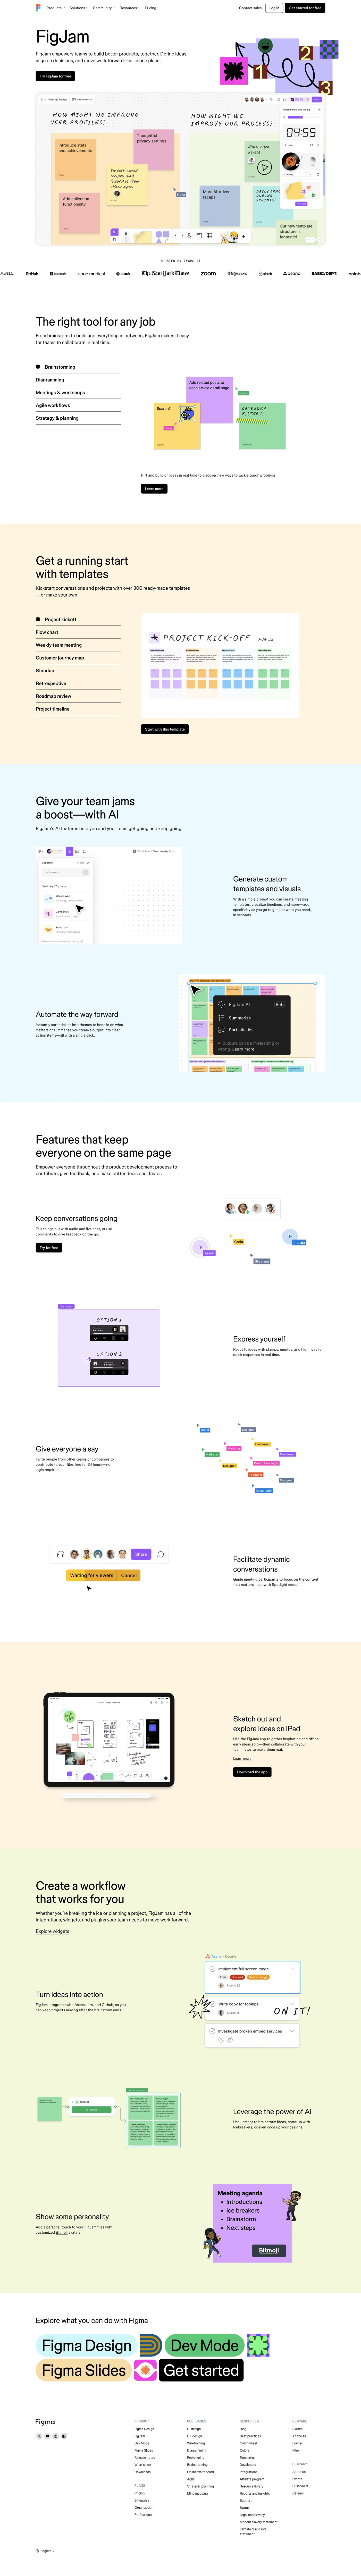 Figma Landing Page Example: Think bigger. Build faster. Figma helps design and development teams build great products, together.